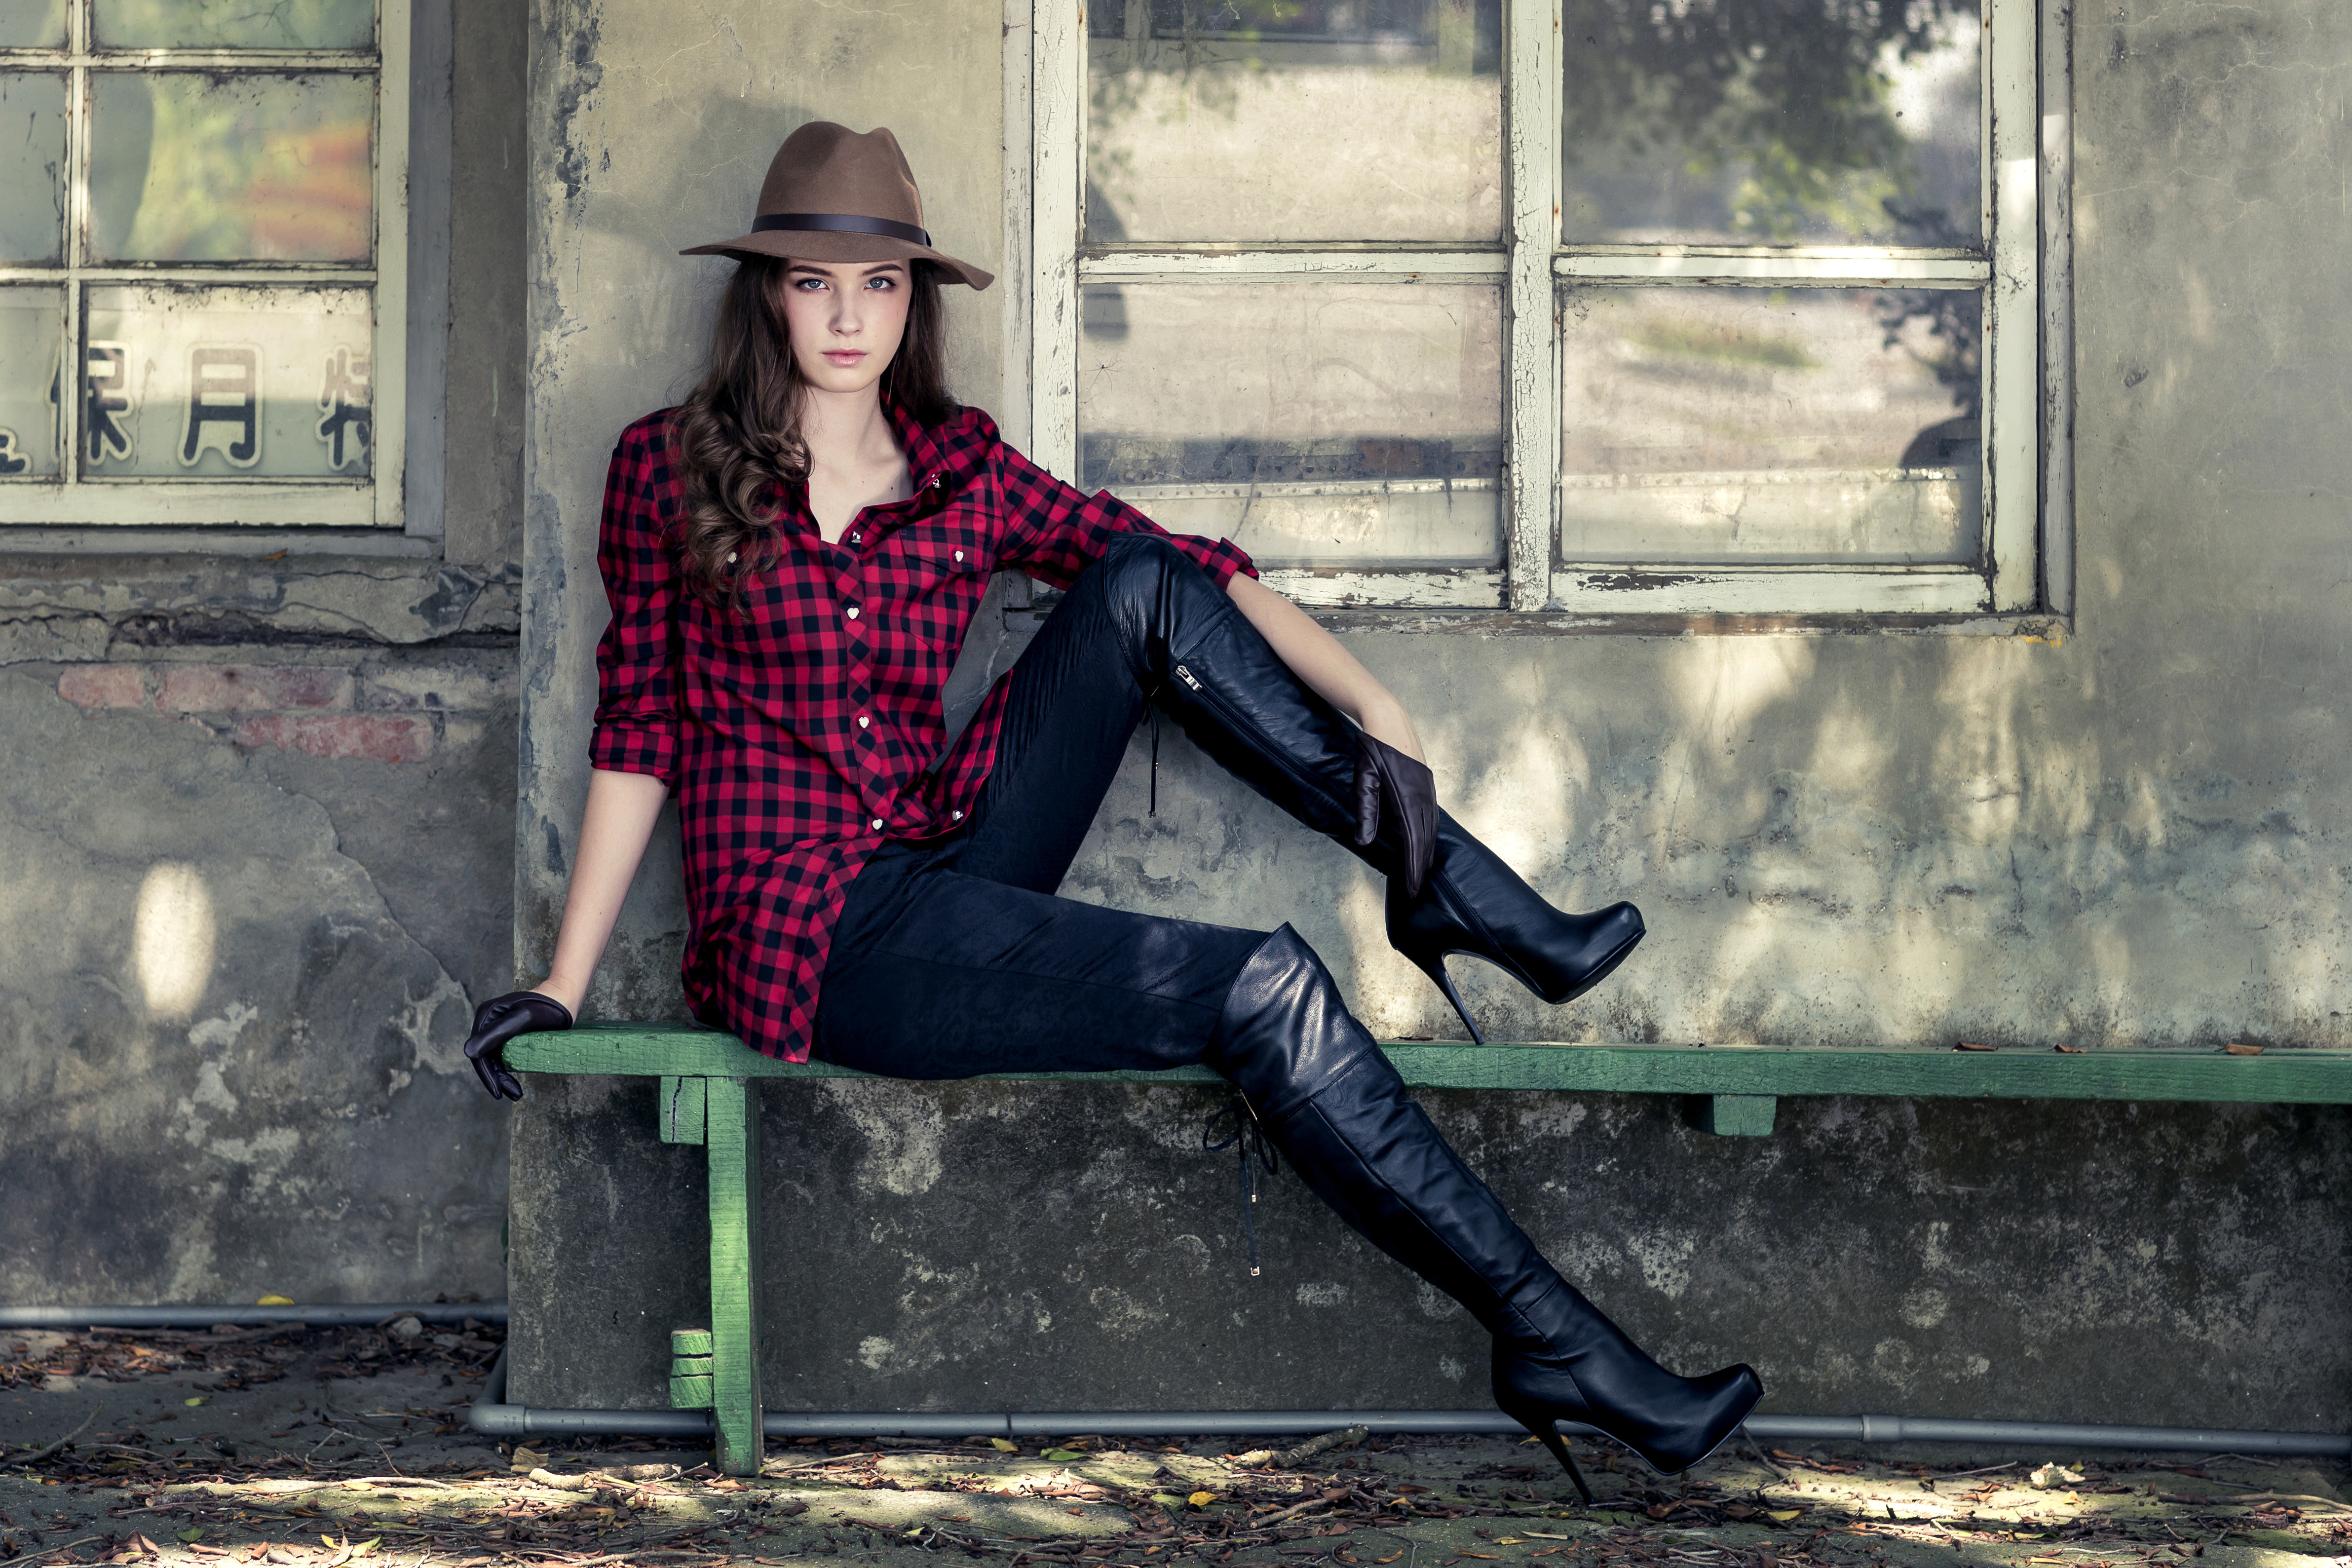 People 4766x3177 model women depth of field high heeled boots knee-high boots hat gloves brown hat on bench black gloves